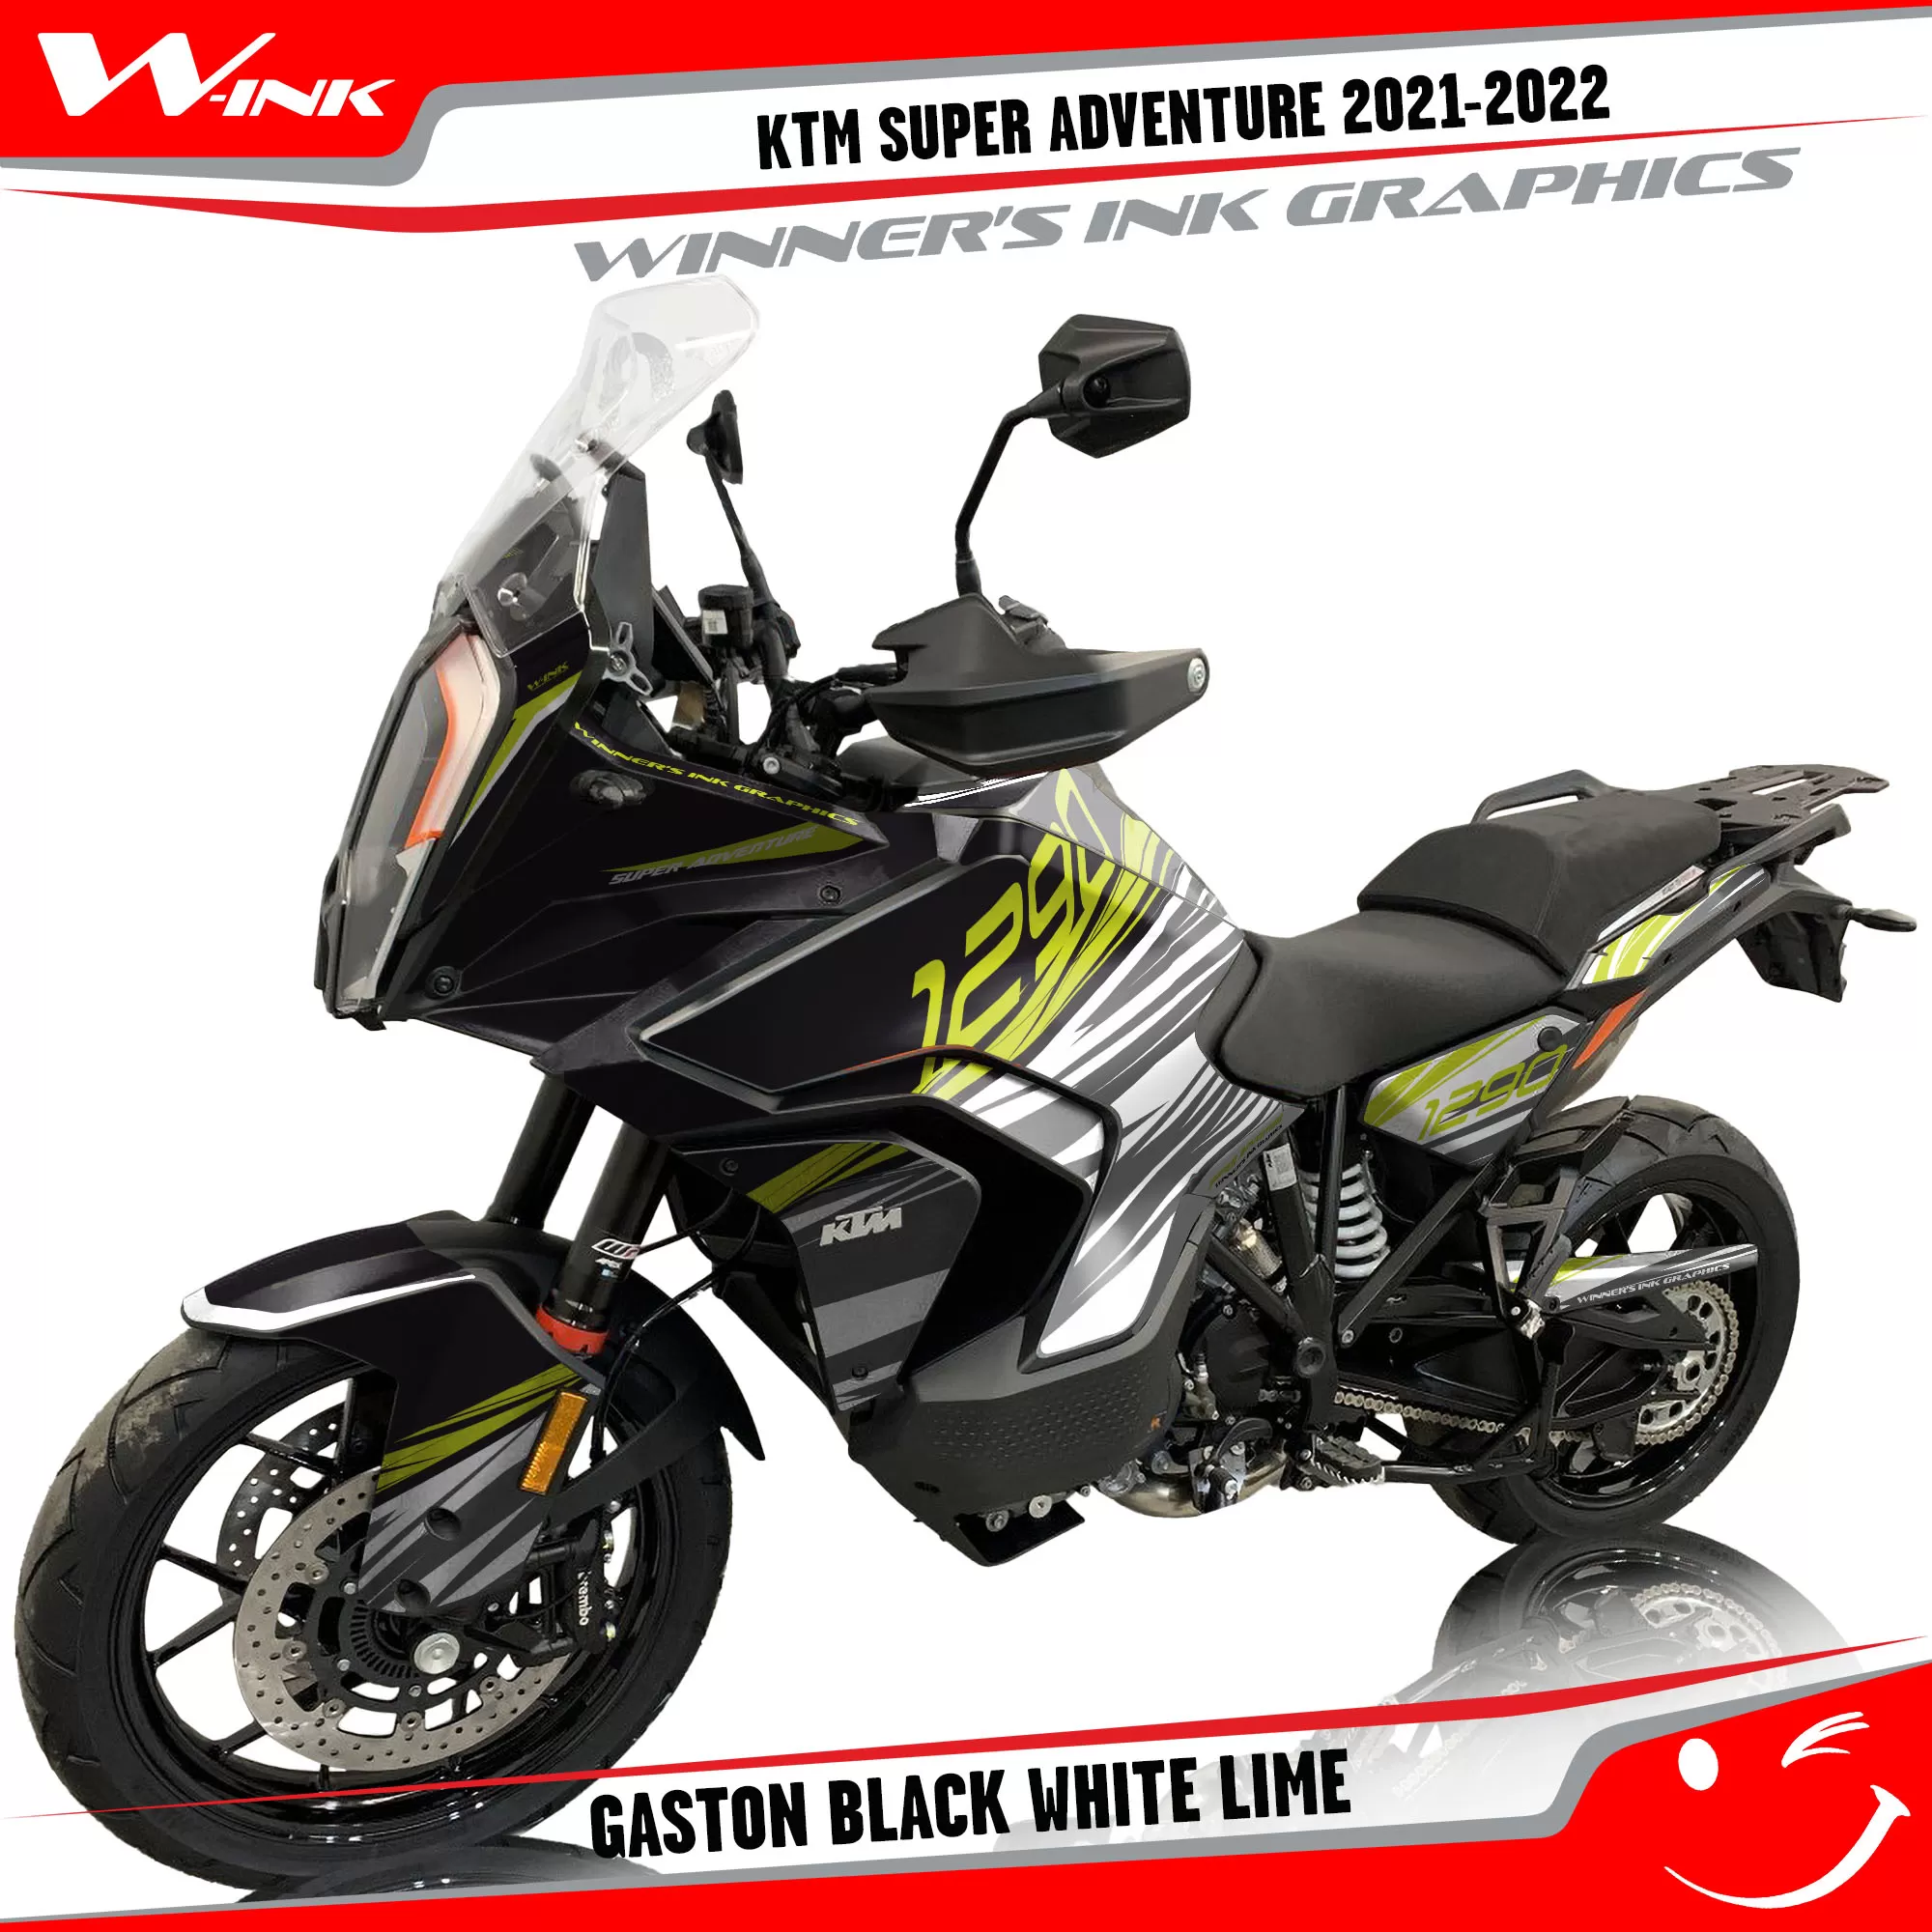 KTM-Super-Adventure-S-2021-2022-graphics-kit-and-decals-with-designs-Gaston-Black-White-Lime